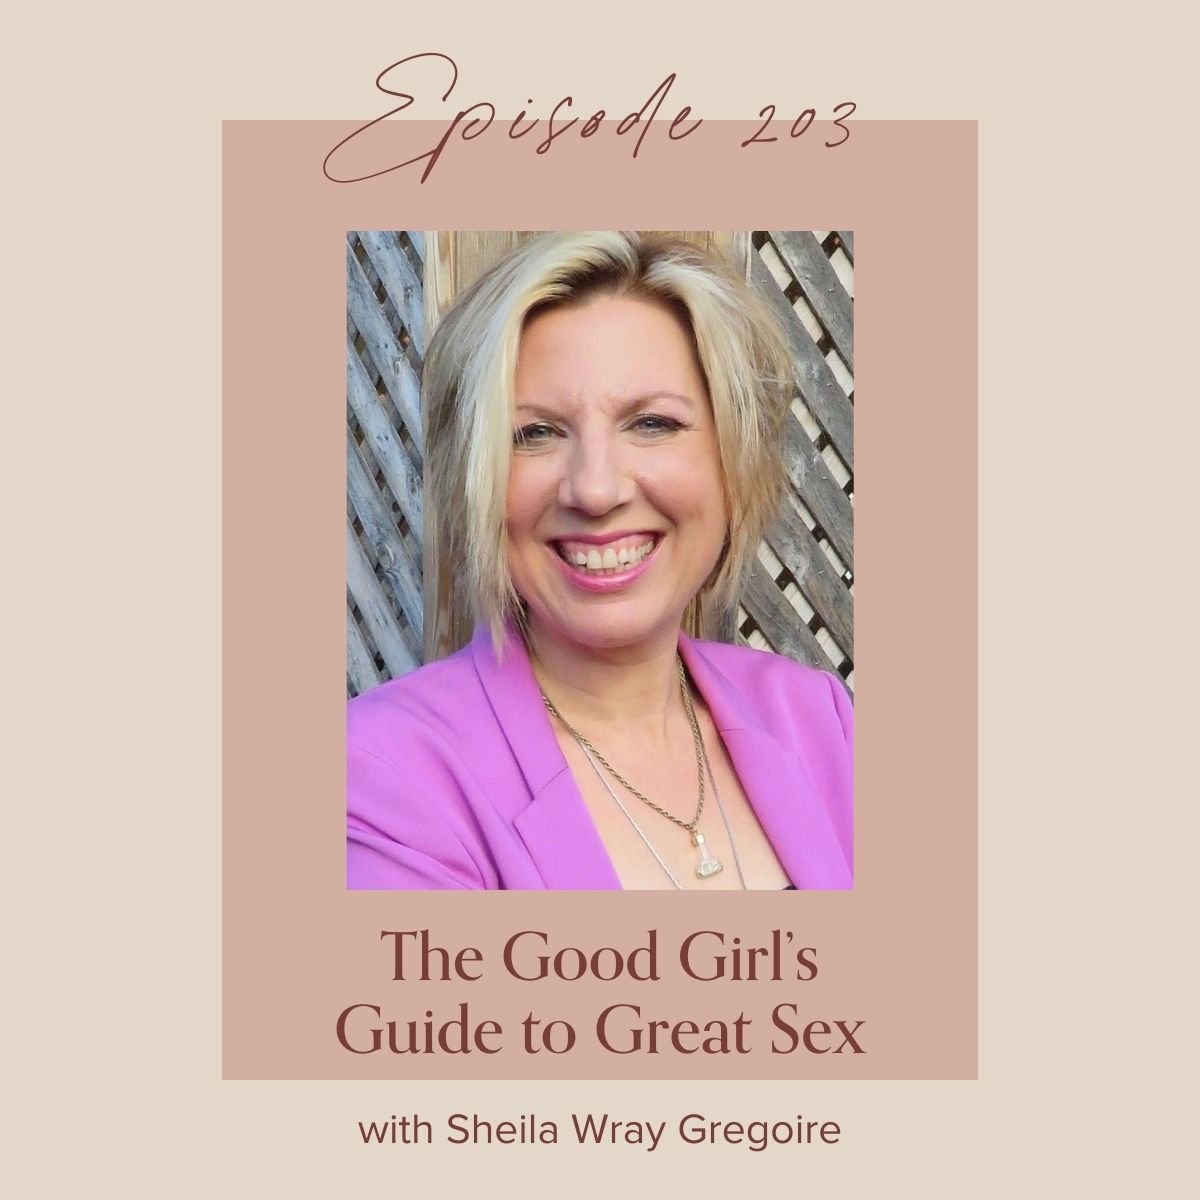 The Good Girls Guide to Great Sex with Sheila Wray Gregoire — The Refined Woman picture